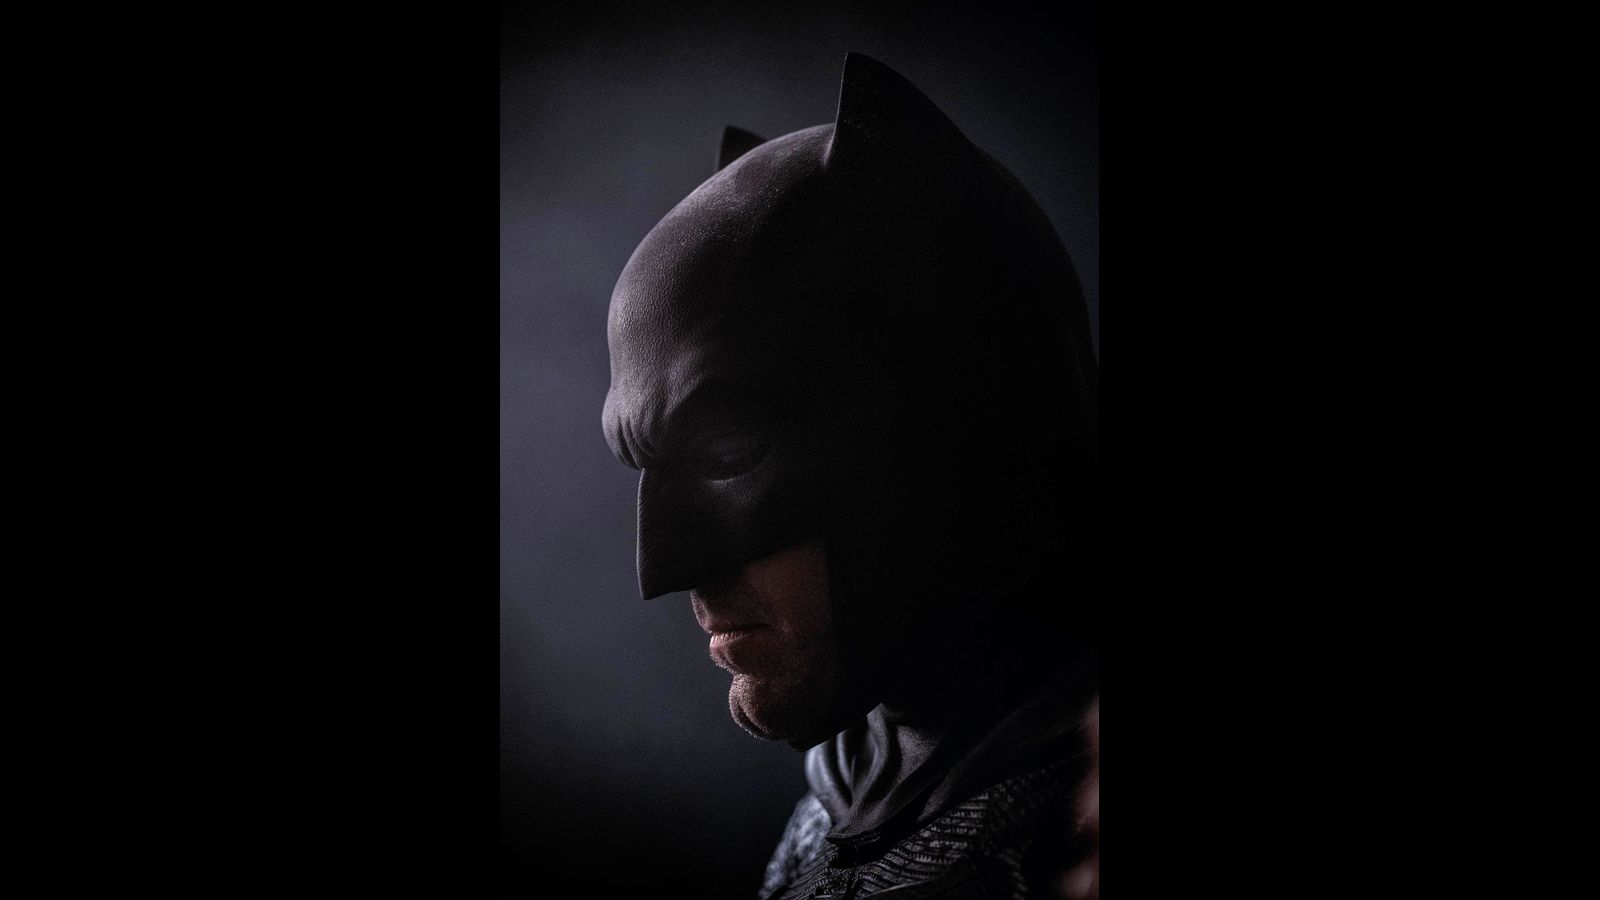 Breaking Down the Highlights in the Second 'The Batman' Trailer